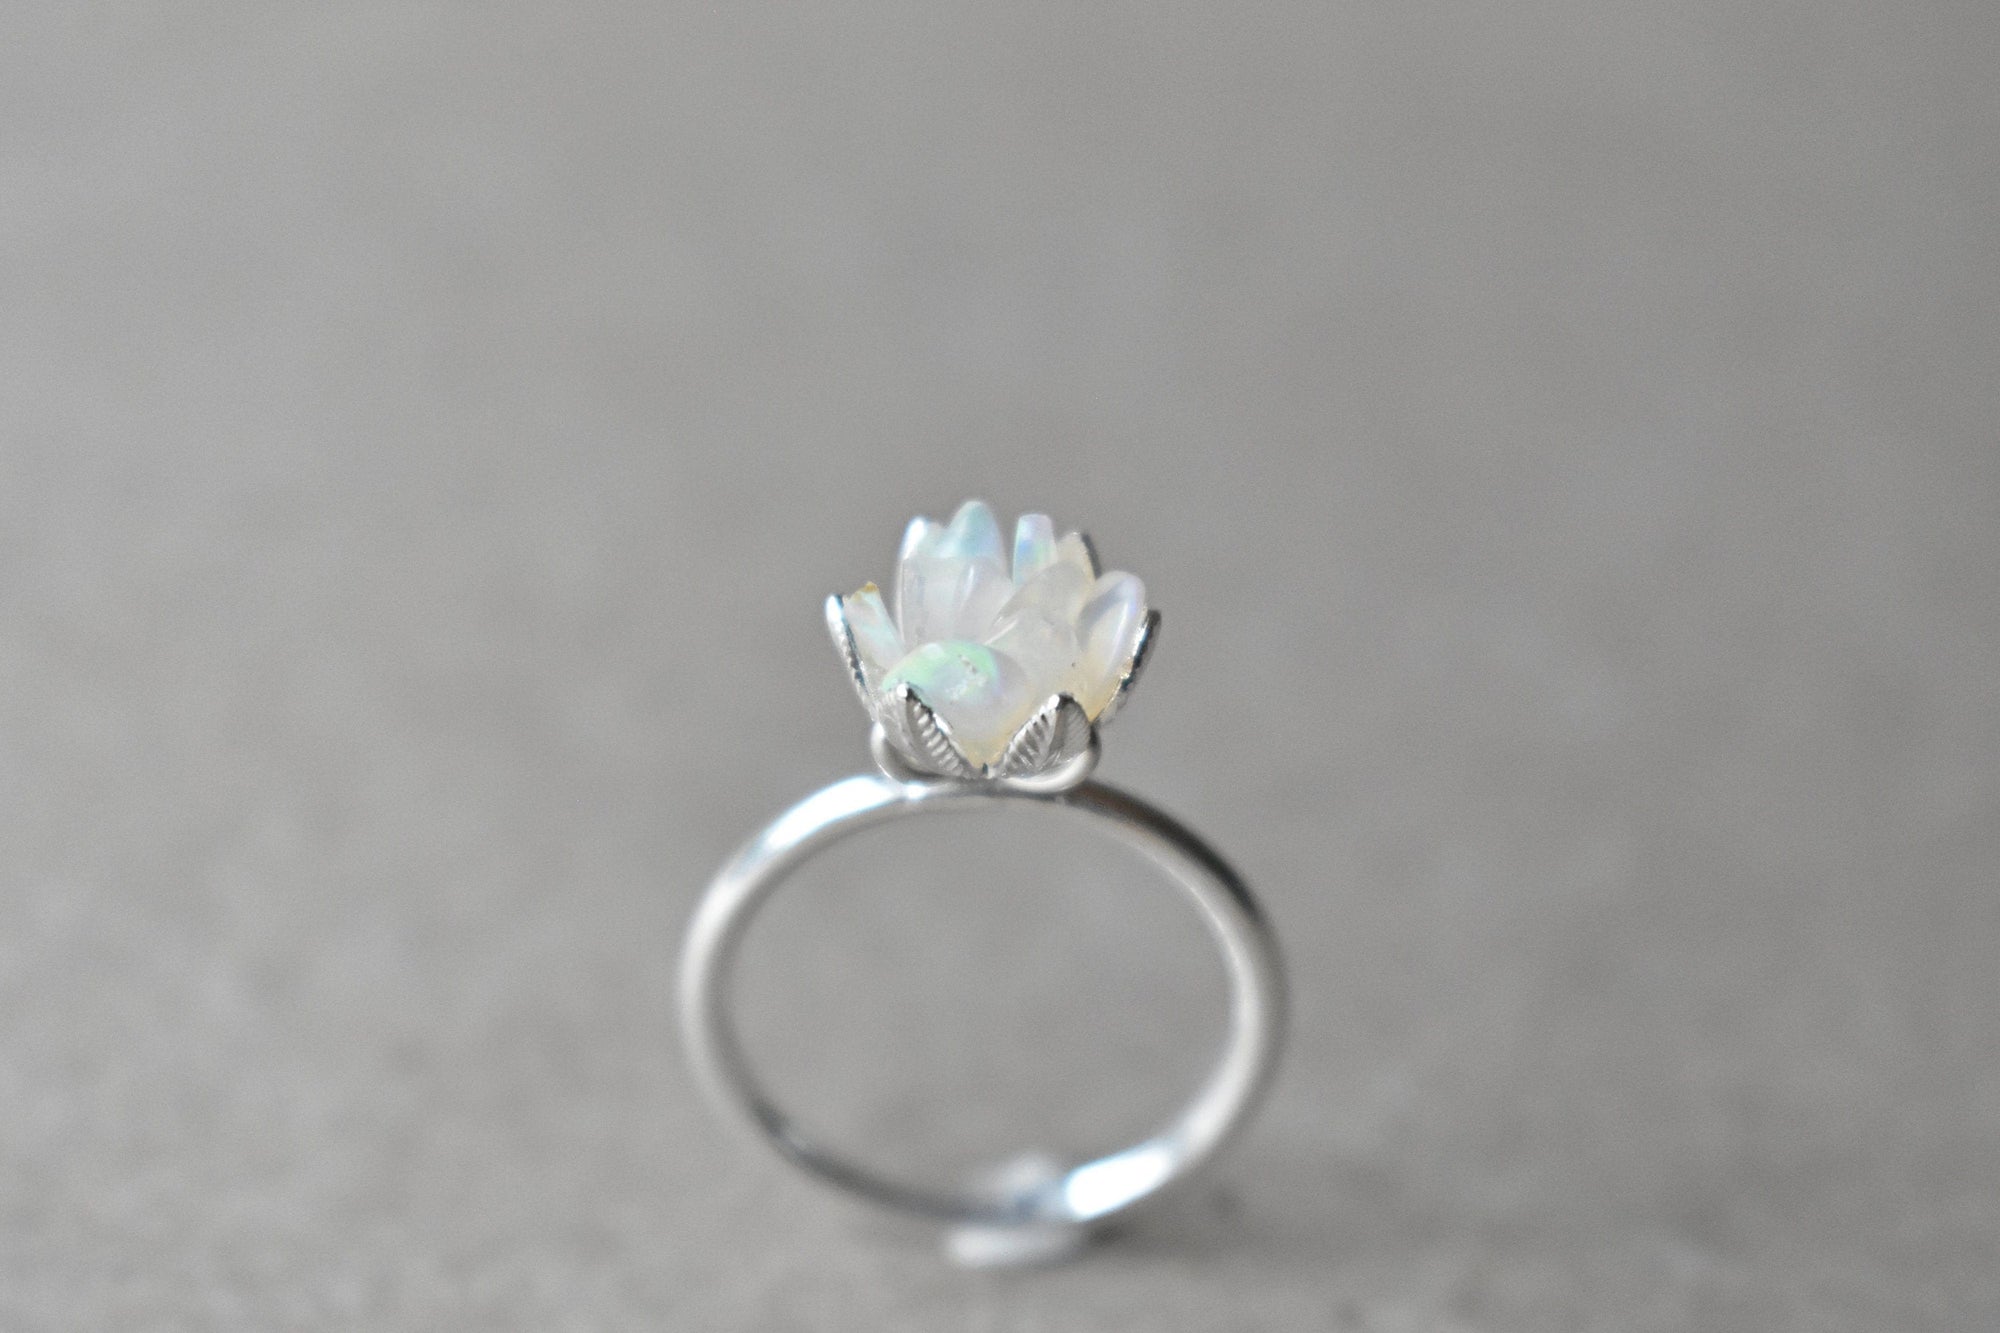 Uncut Opal Ring, Lotus Flower Ring in Opal & Sterling Silver, Custom October Birthstone Ring, Raw Fire Opal Jewelry, Opal Valentine for Her